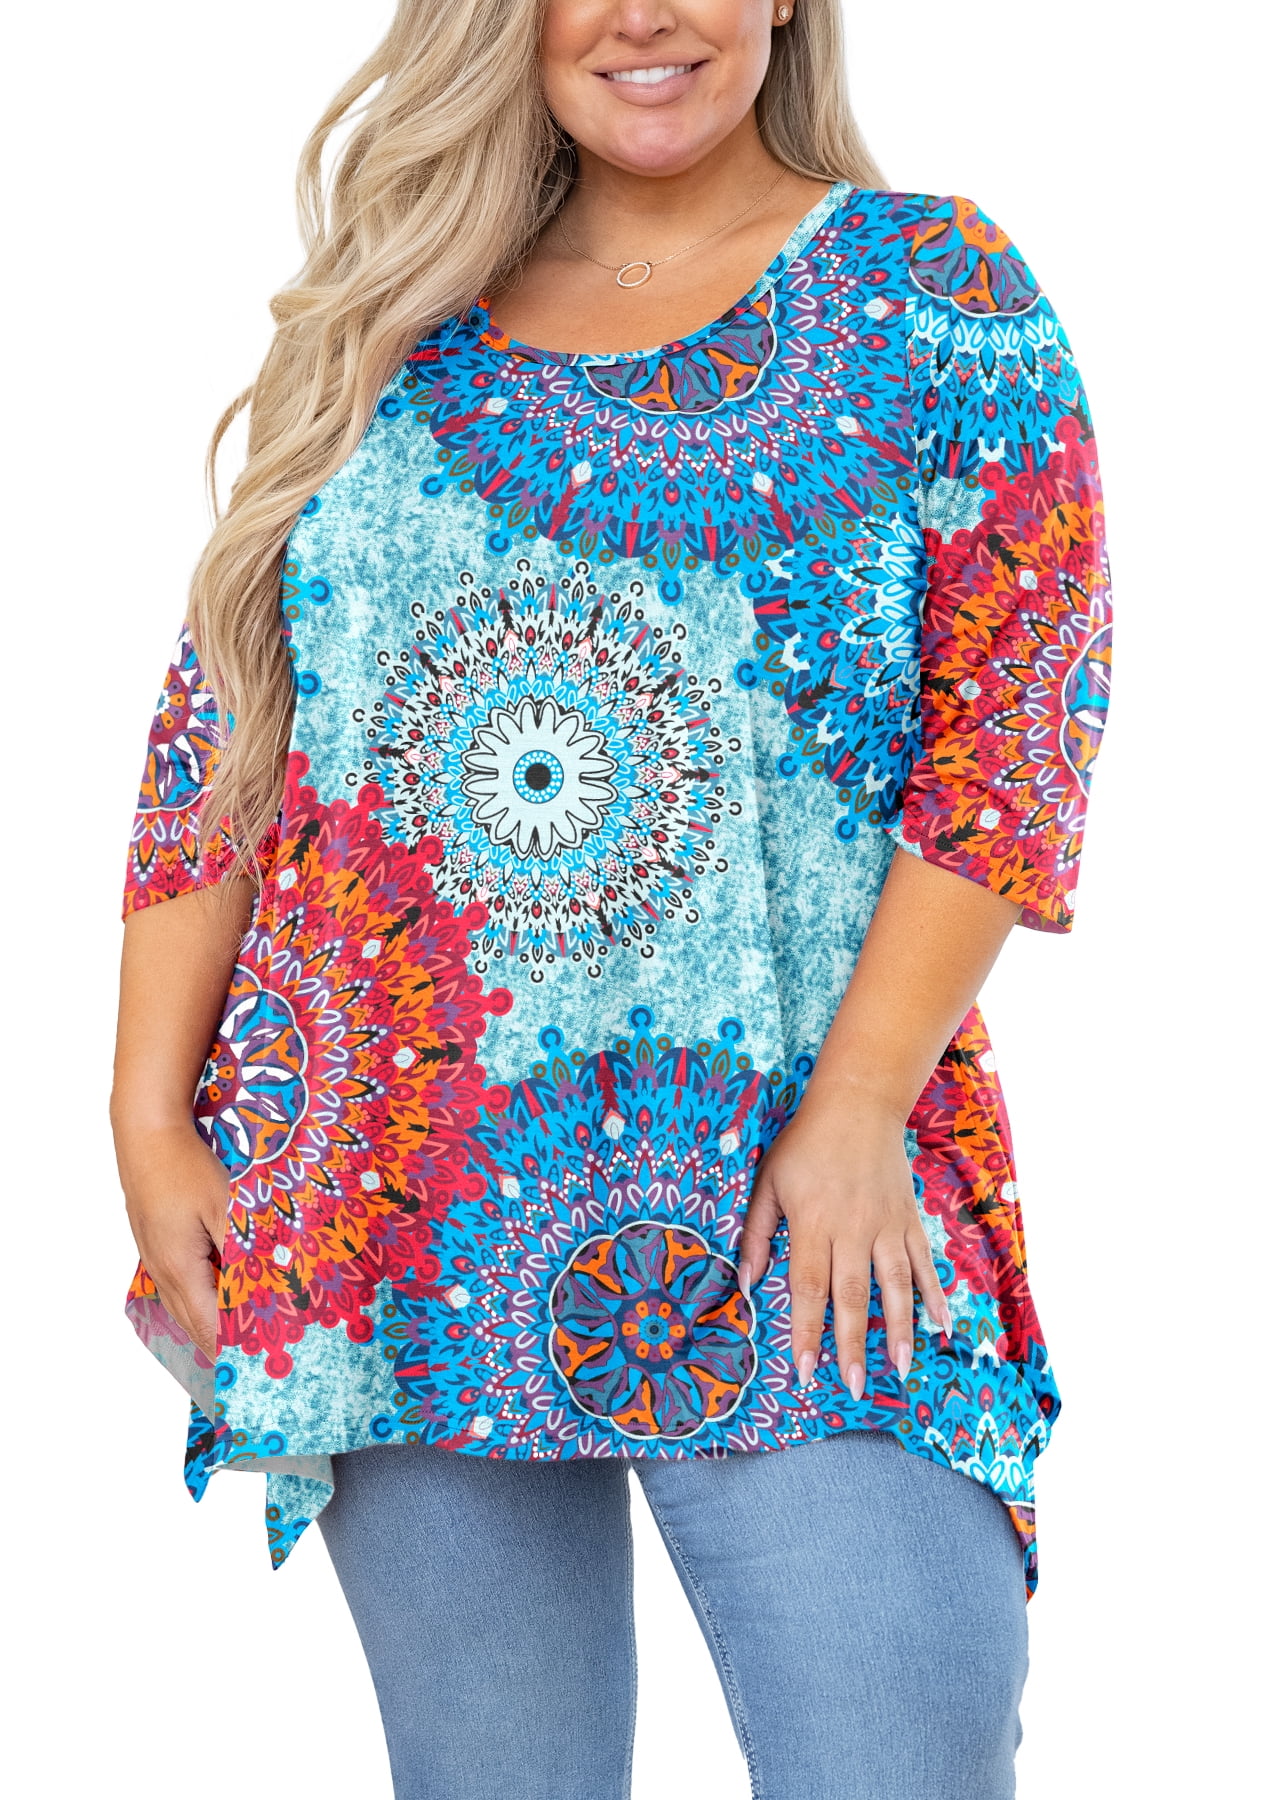 SHOWMALL Plus Size Tunics for Women 3/4 Sleeve Blouse Swing Top Floral Blue 5X Clothing Crewneck Maternity Loose Fitting Clothes - Walmart.com